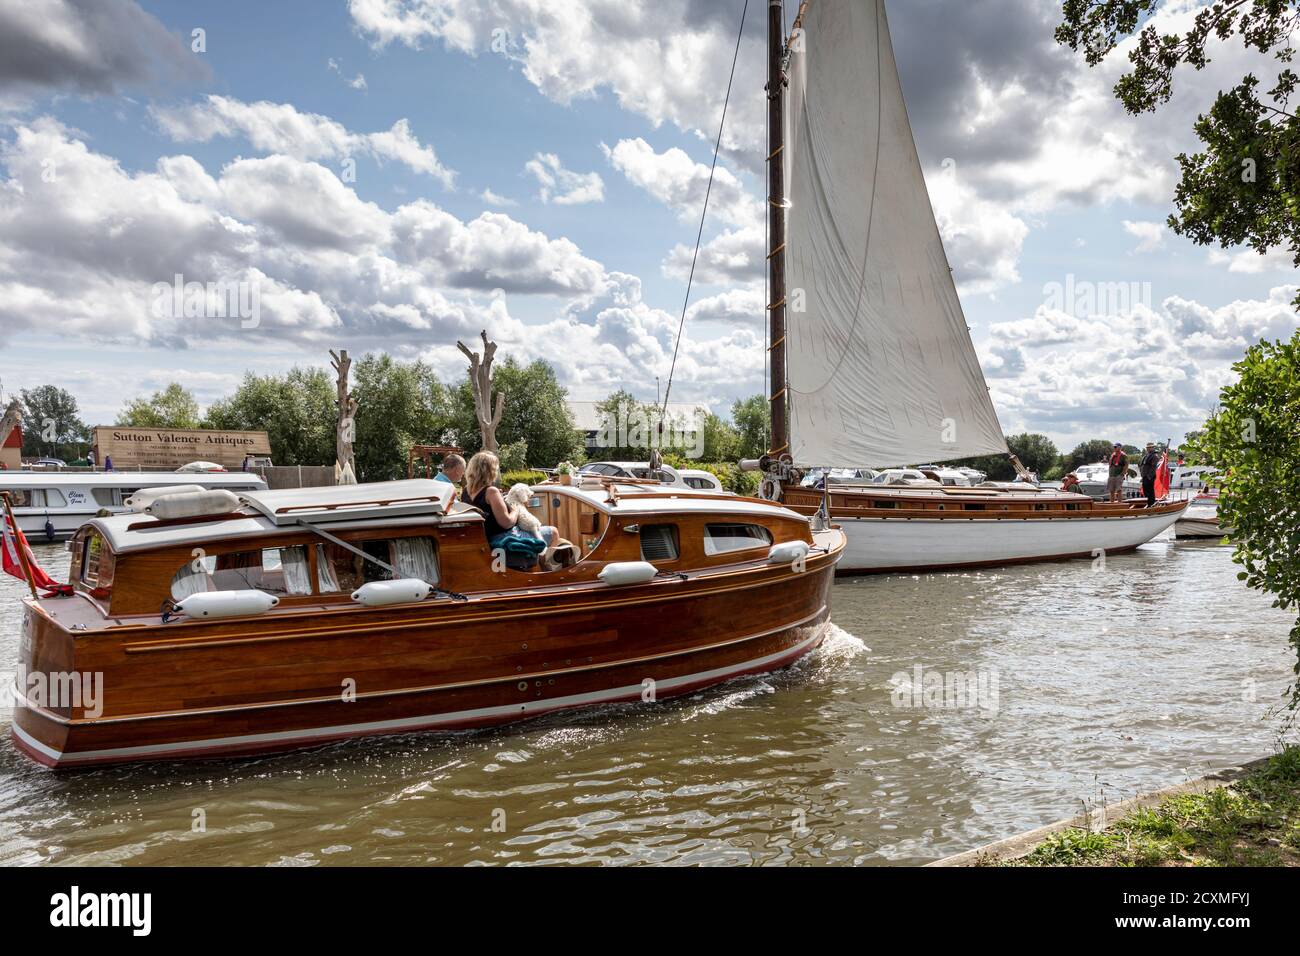 Numerous kinds of vessels making their way on the busy river Bure at Horning, Norfolk Broads, England Stock Photo